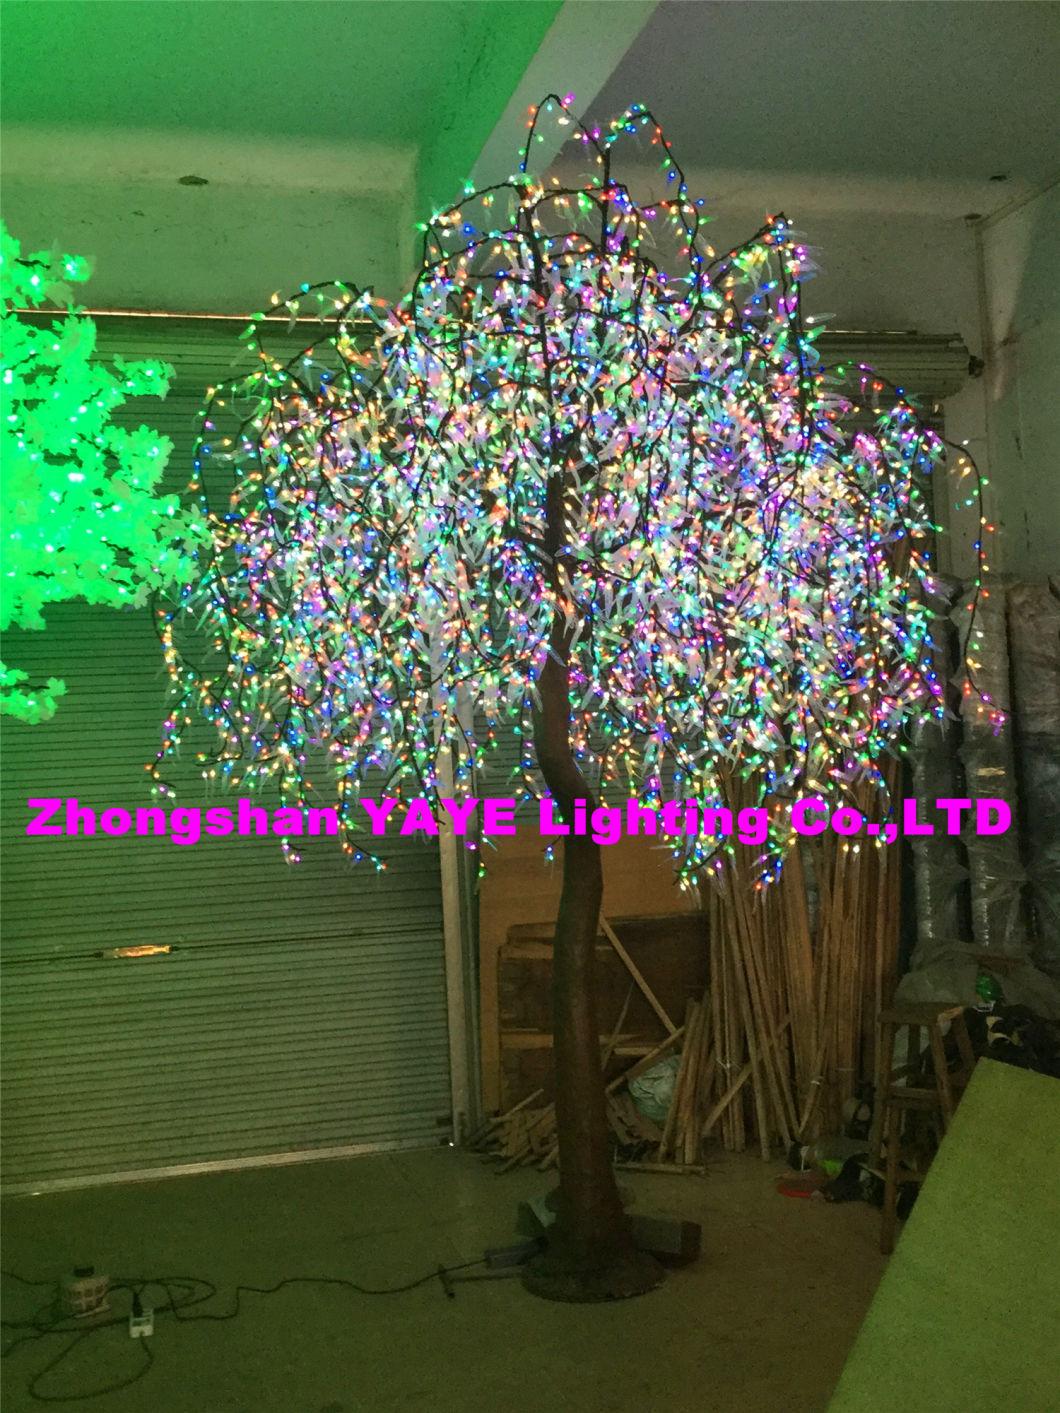 Yaye 2021 Hot Sell Factory Price Outdoor Waterproof RGB LED Willow Tree with 2 Years Warranty